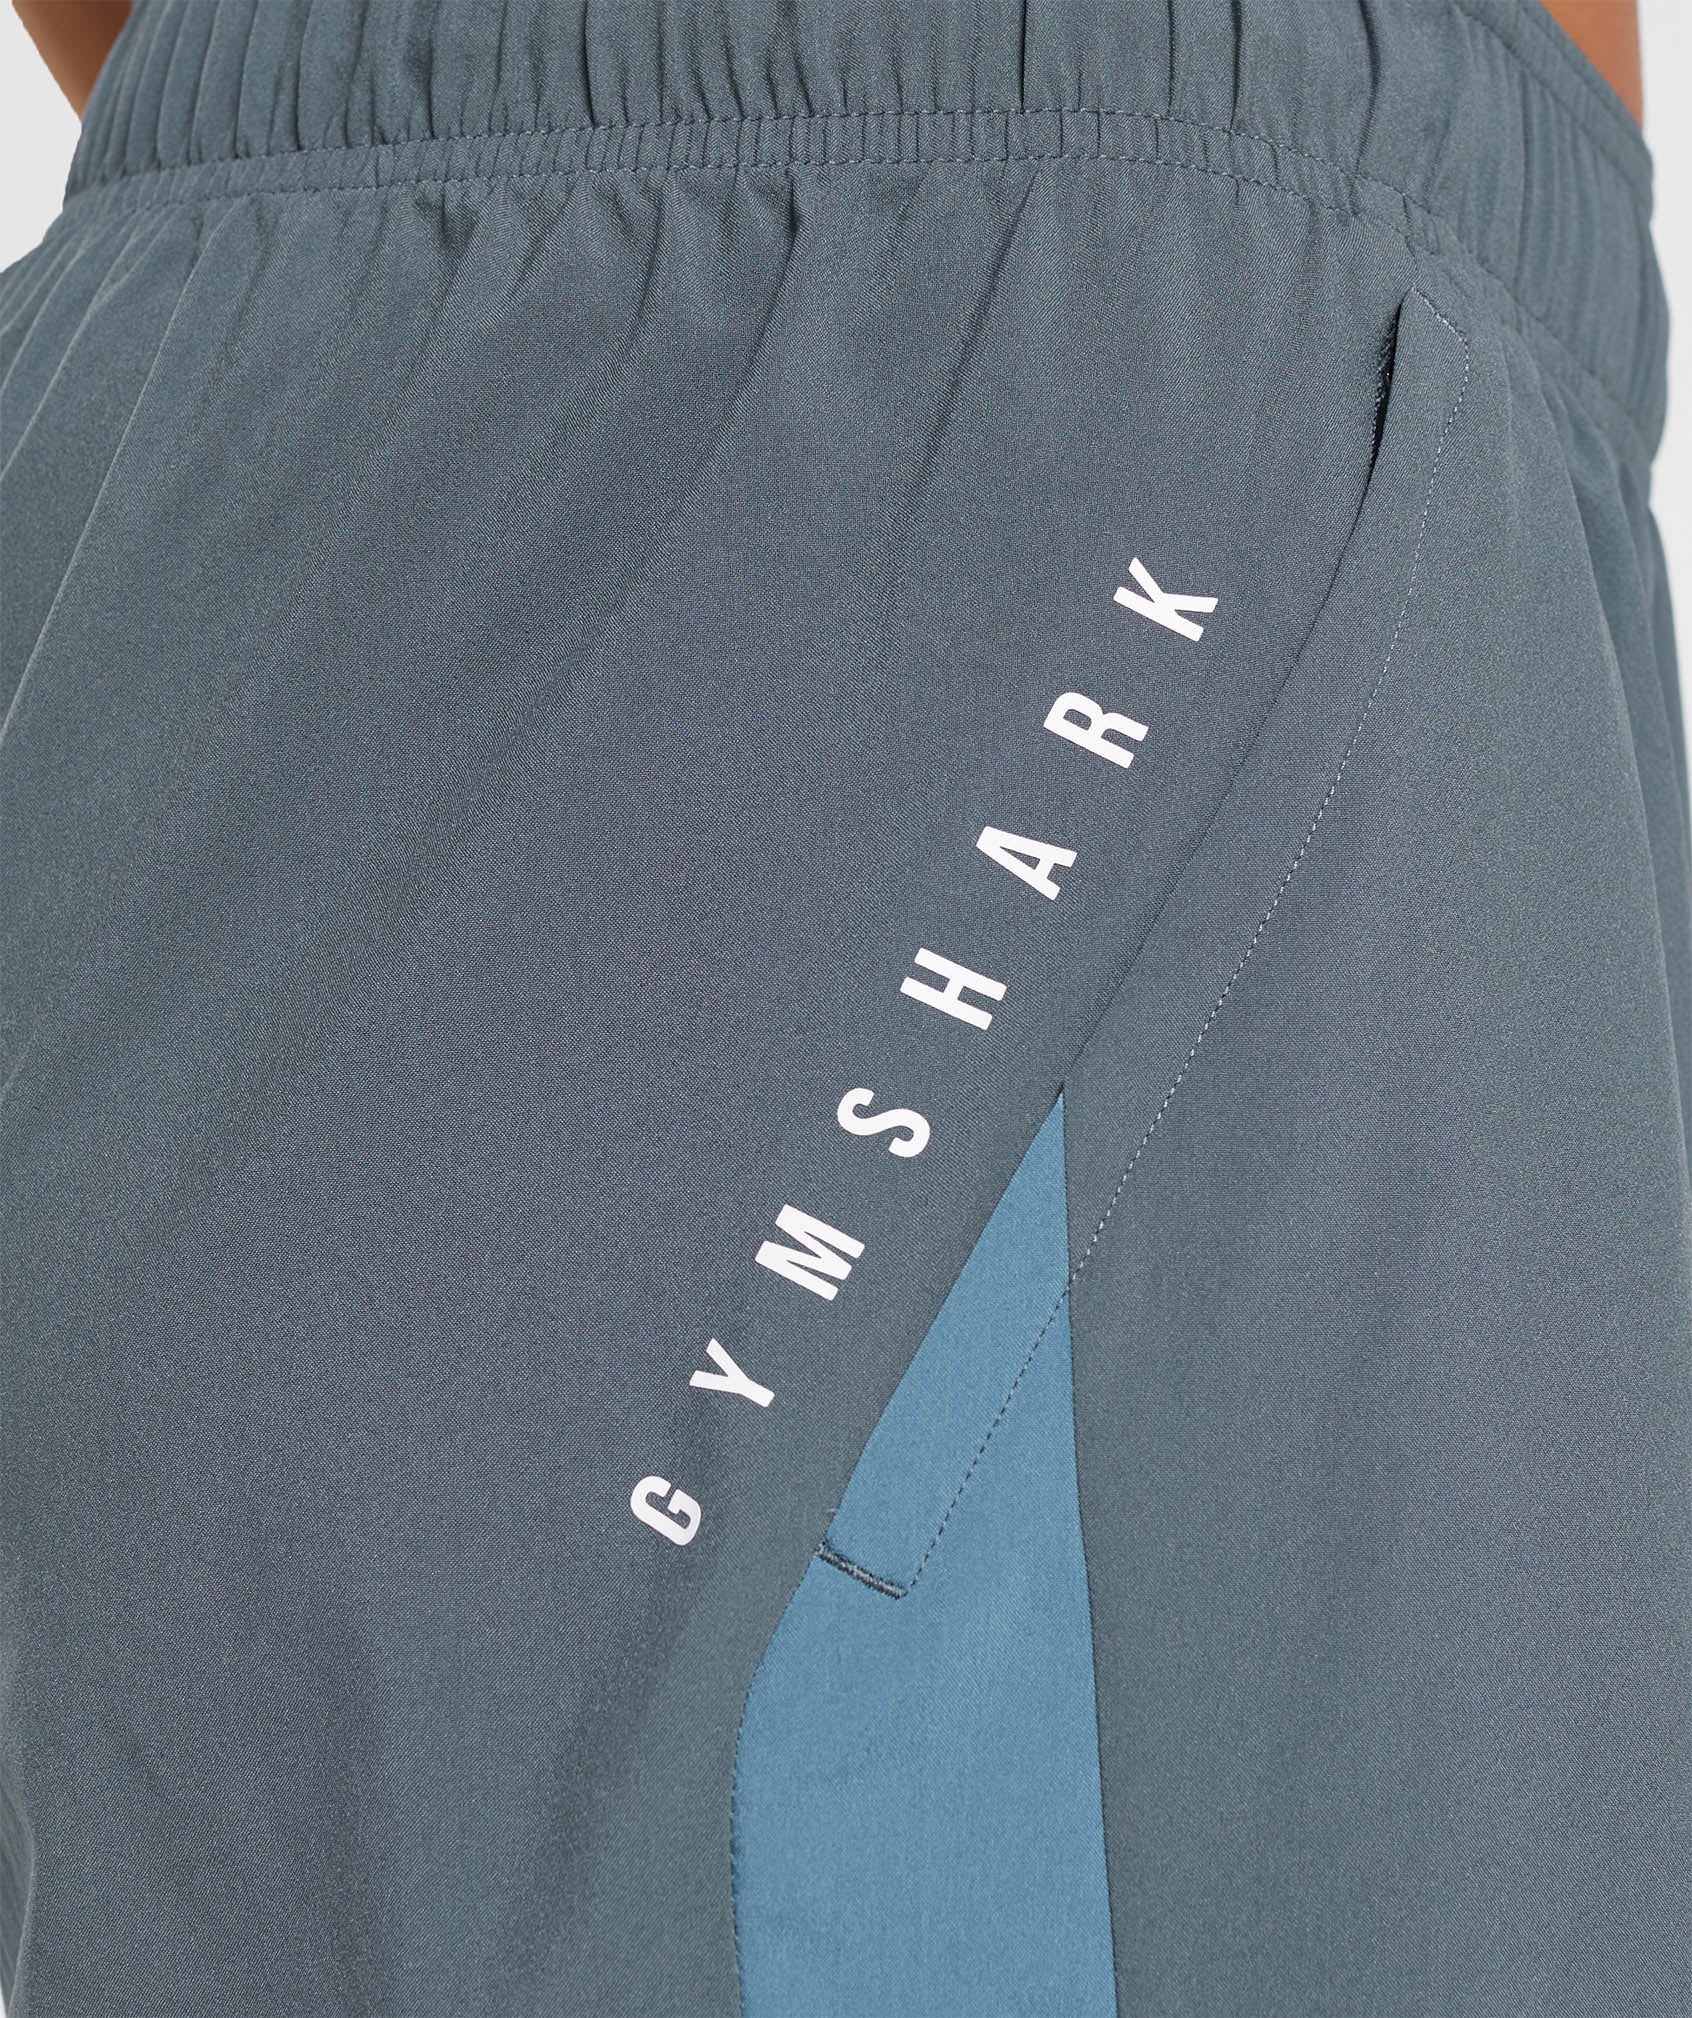 Sport 7" Shorts in Titanium Blue/Faded Blue - view 6